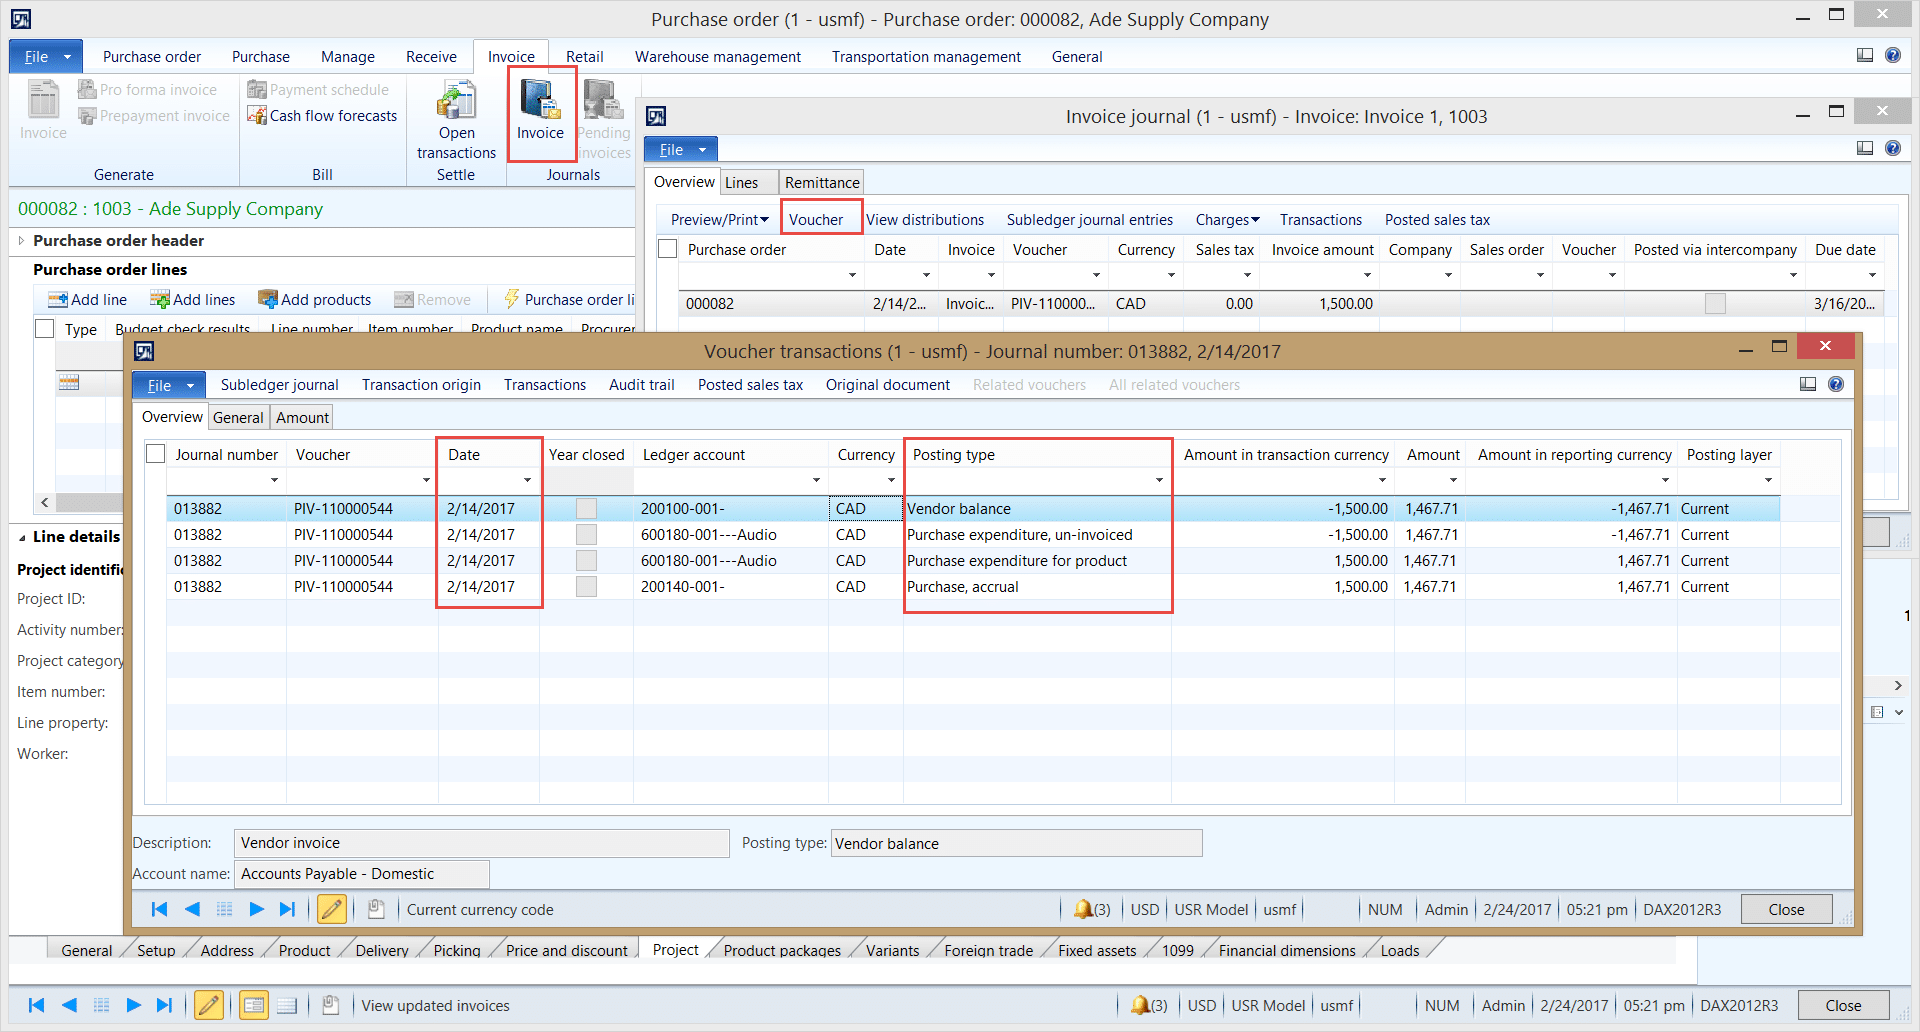 Voucher transactions inquiry “missing” link to document and description in dynamics ax 2012